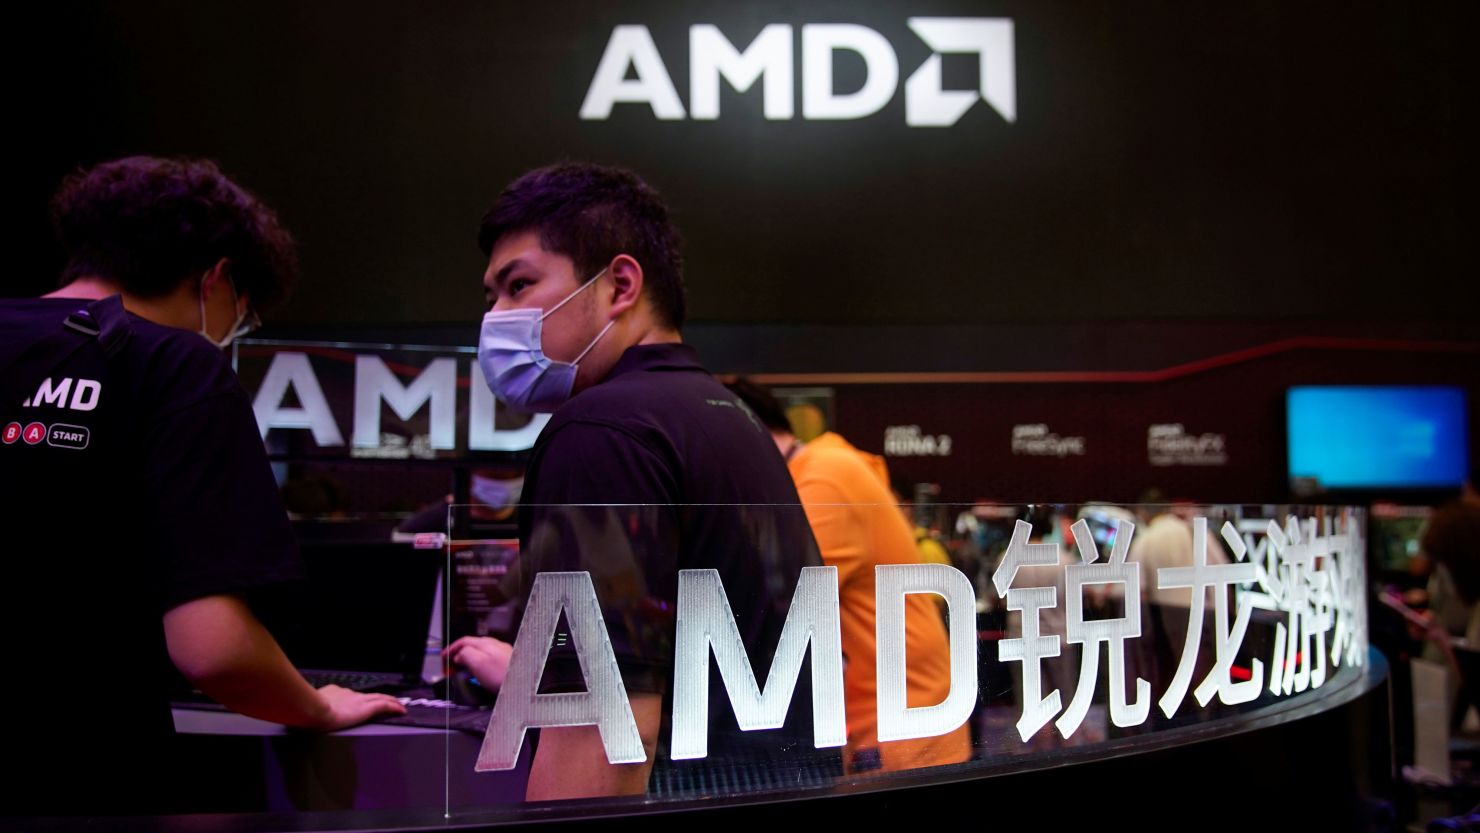 Signs of AMD are seen at the China Digital Entertainment Expo and Conference, also known as ChinaJoy, in Shanghai, China July 30, 2021.